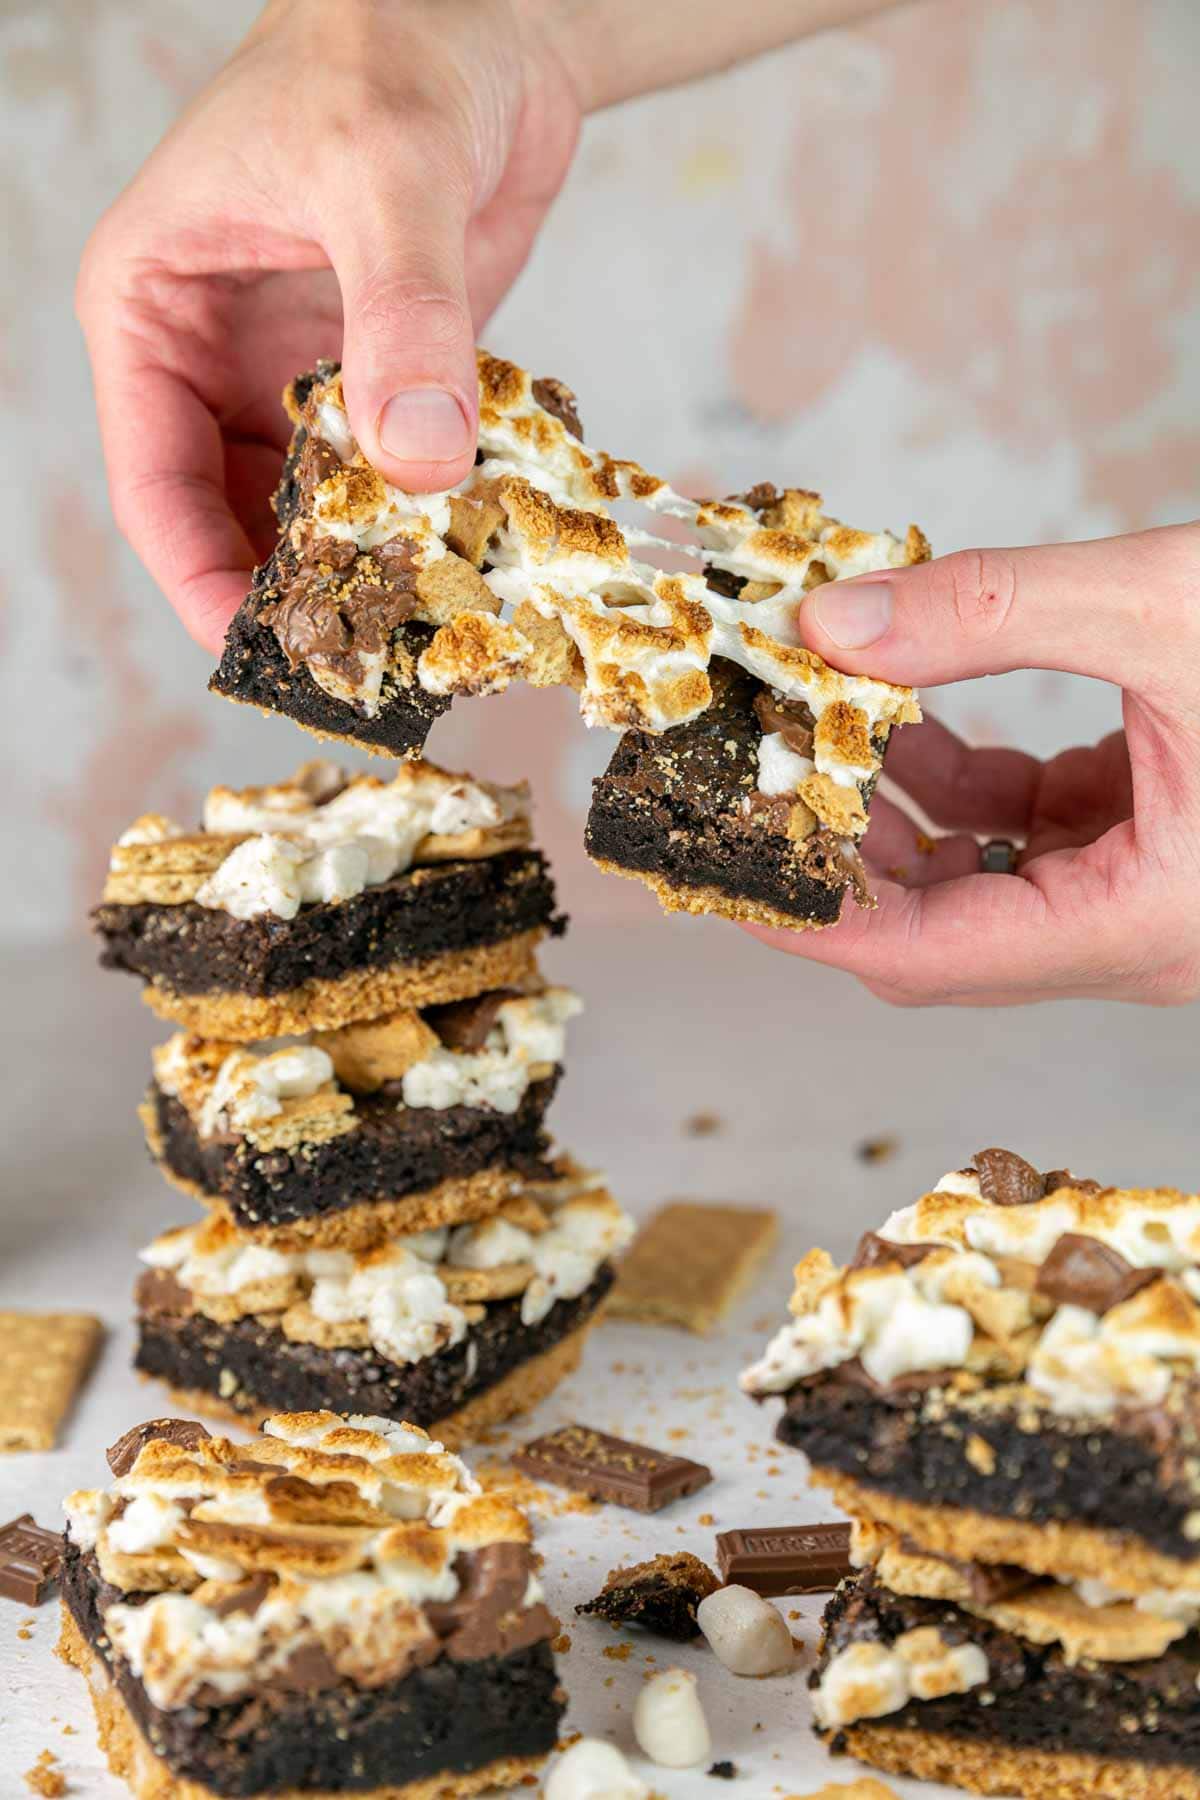 a smores brownie being pulled apart highlighting the gooey marshmallow